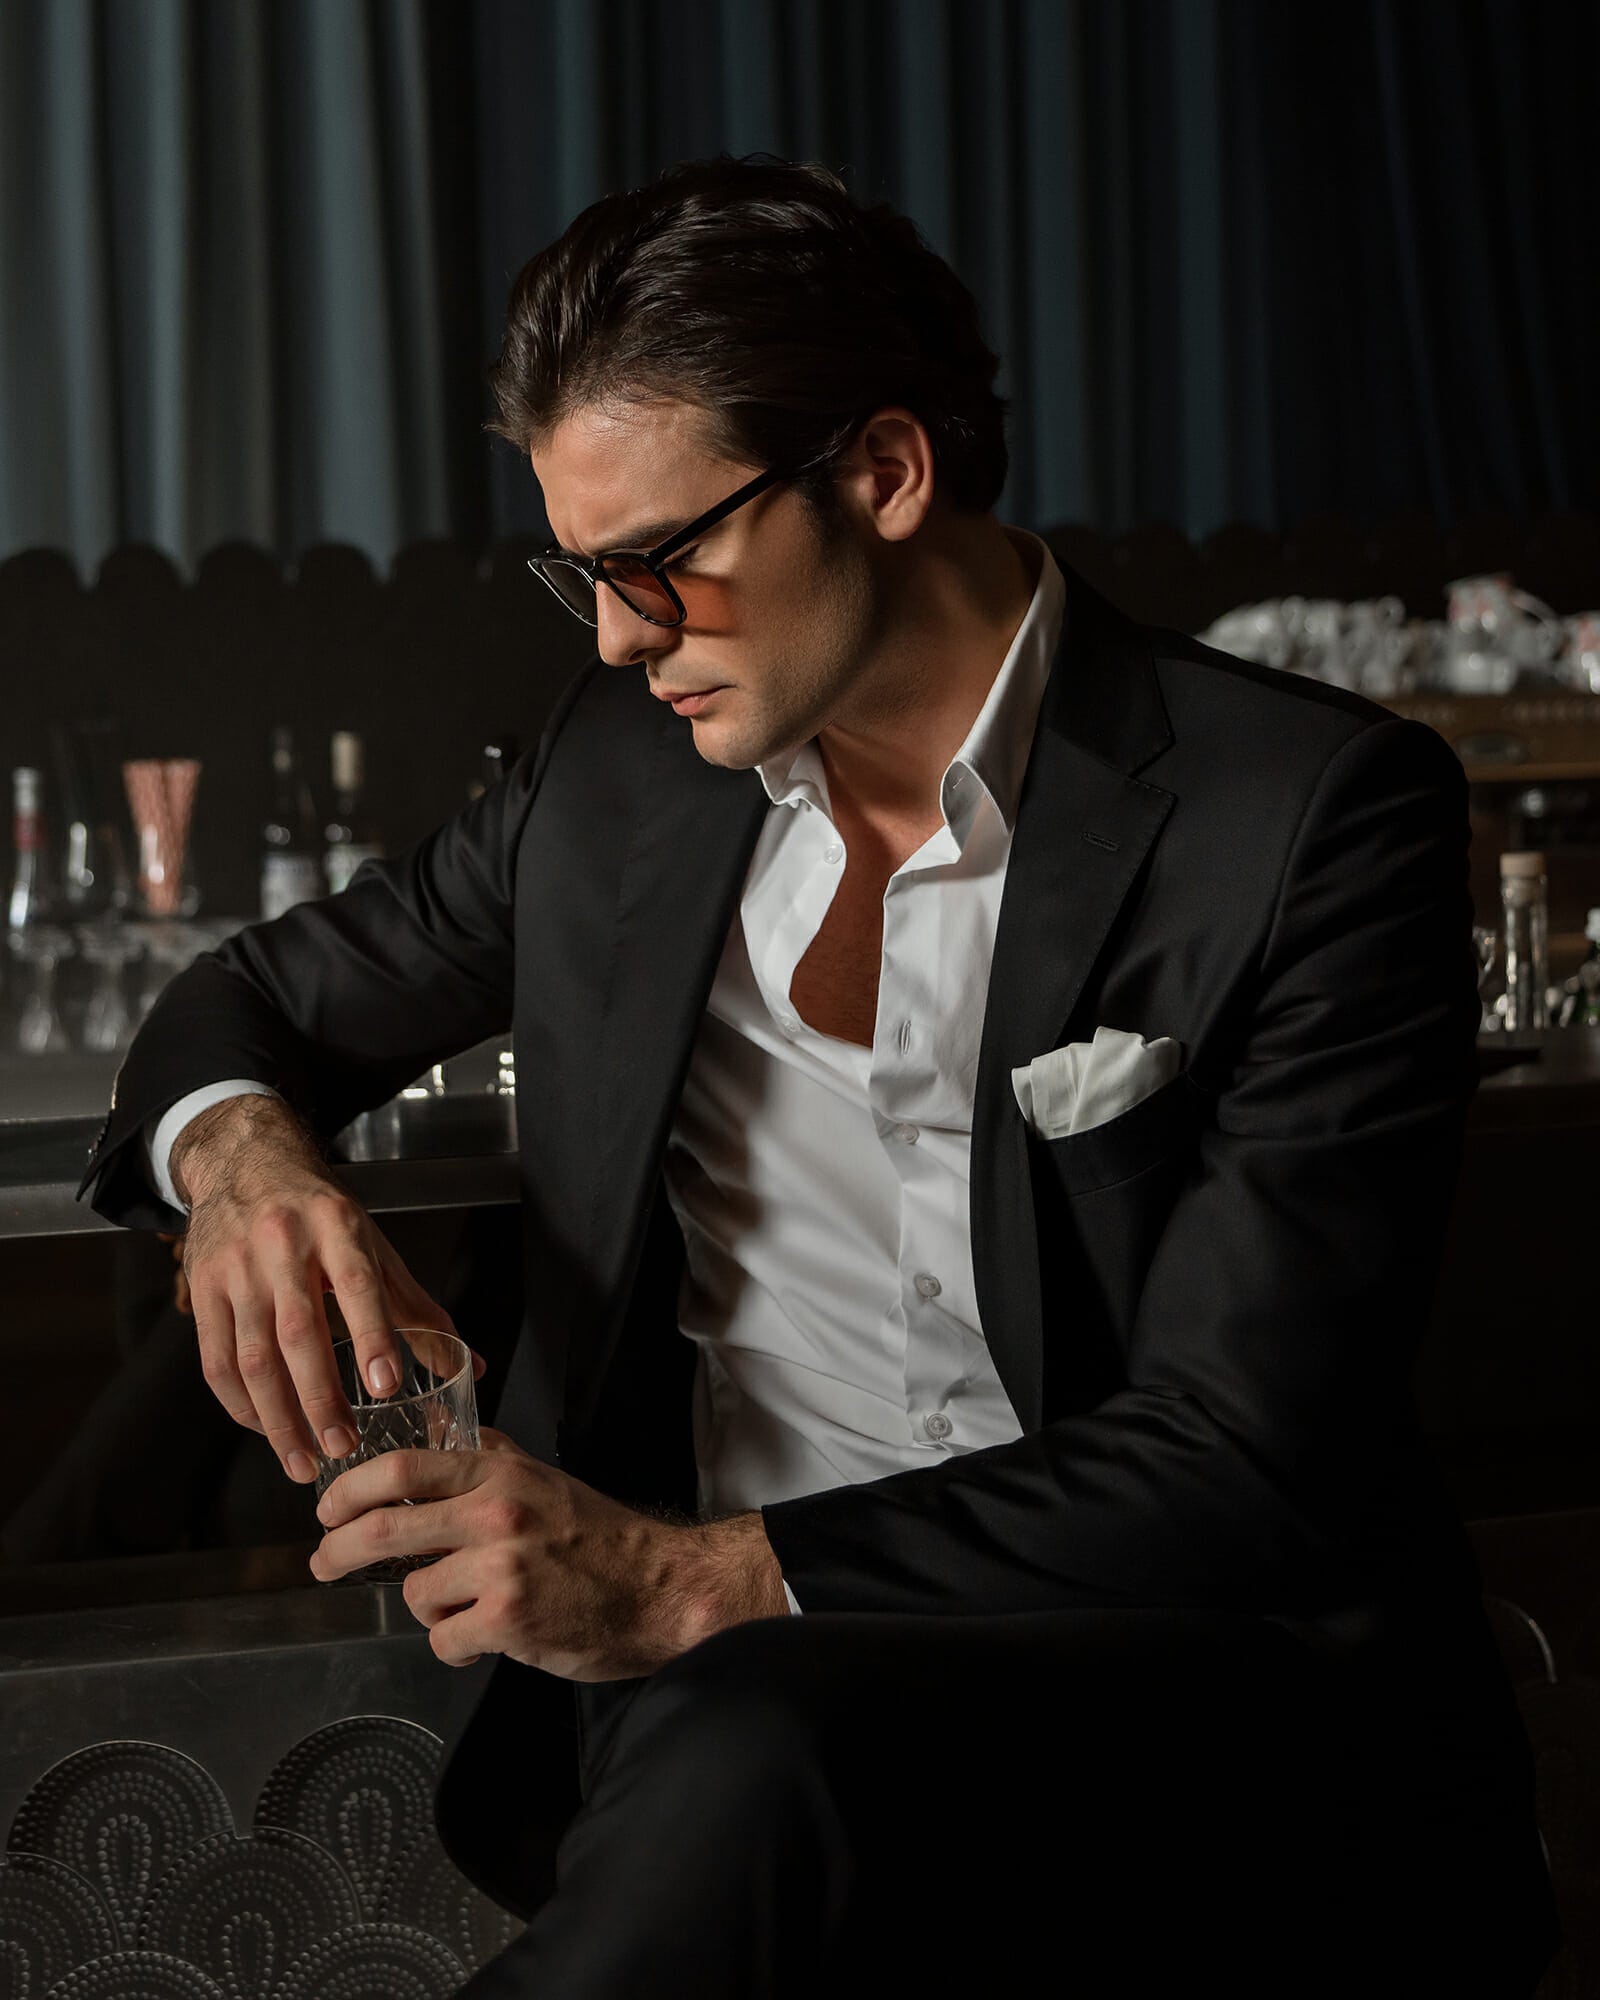 A dark haired man at an elegant bar. He is holding a whisky glass with his two hands, lowered gaze. He is wearing a black suit, a white shirt and black acetat sunglasses.